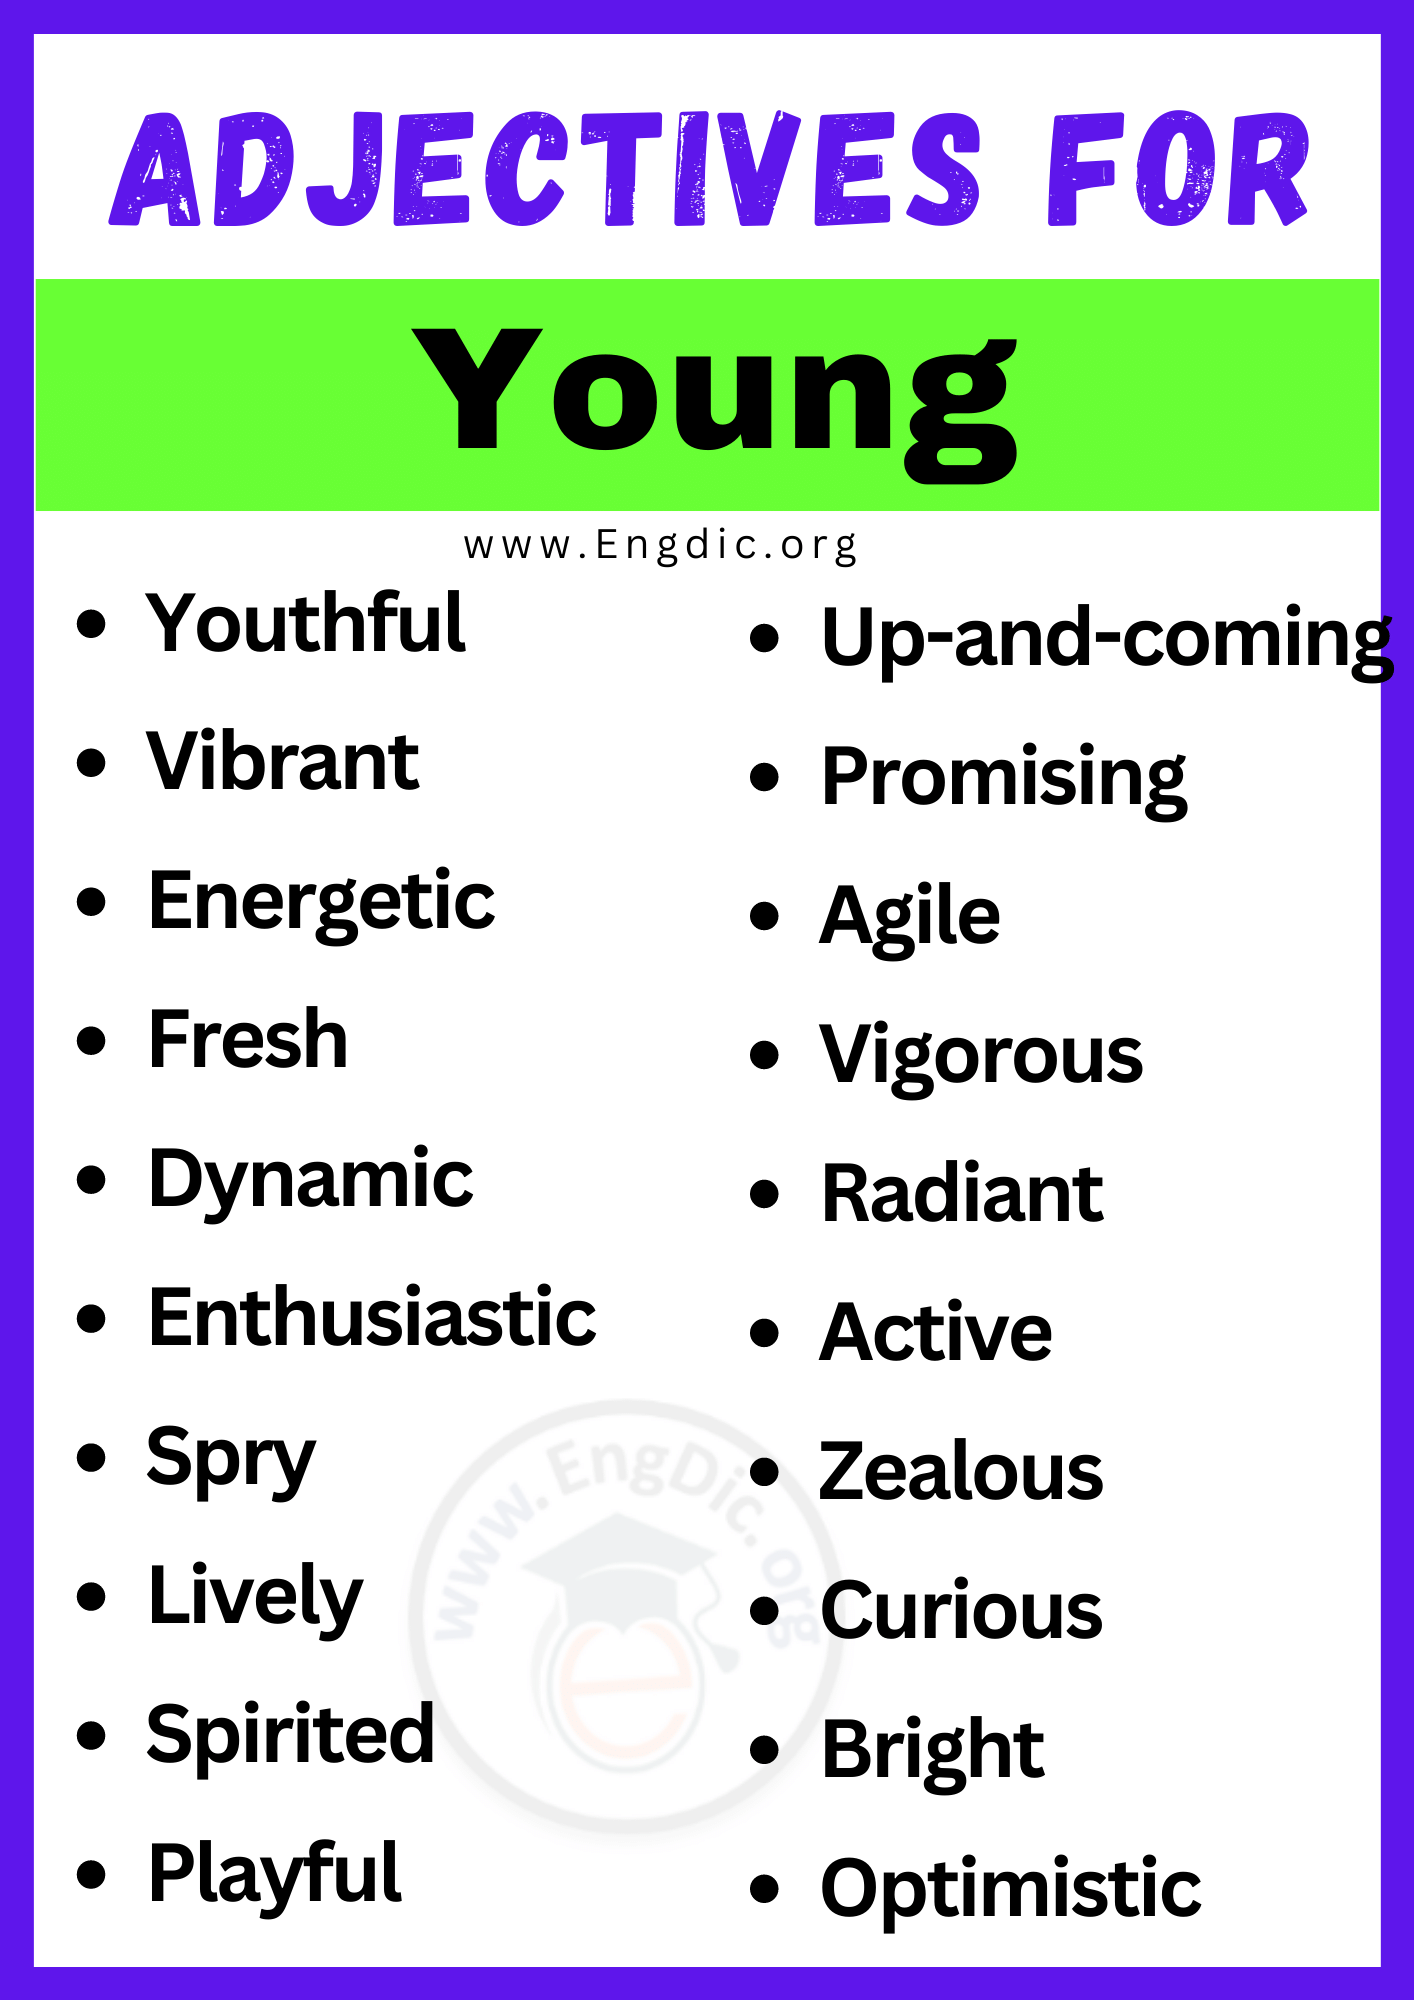 Adjectives for Young